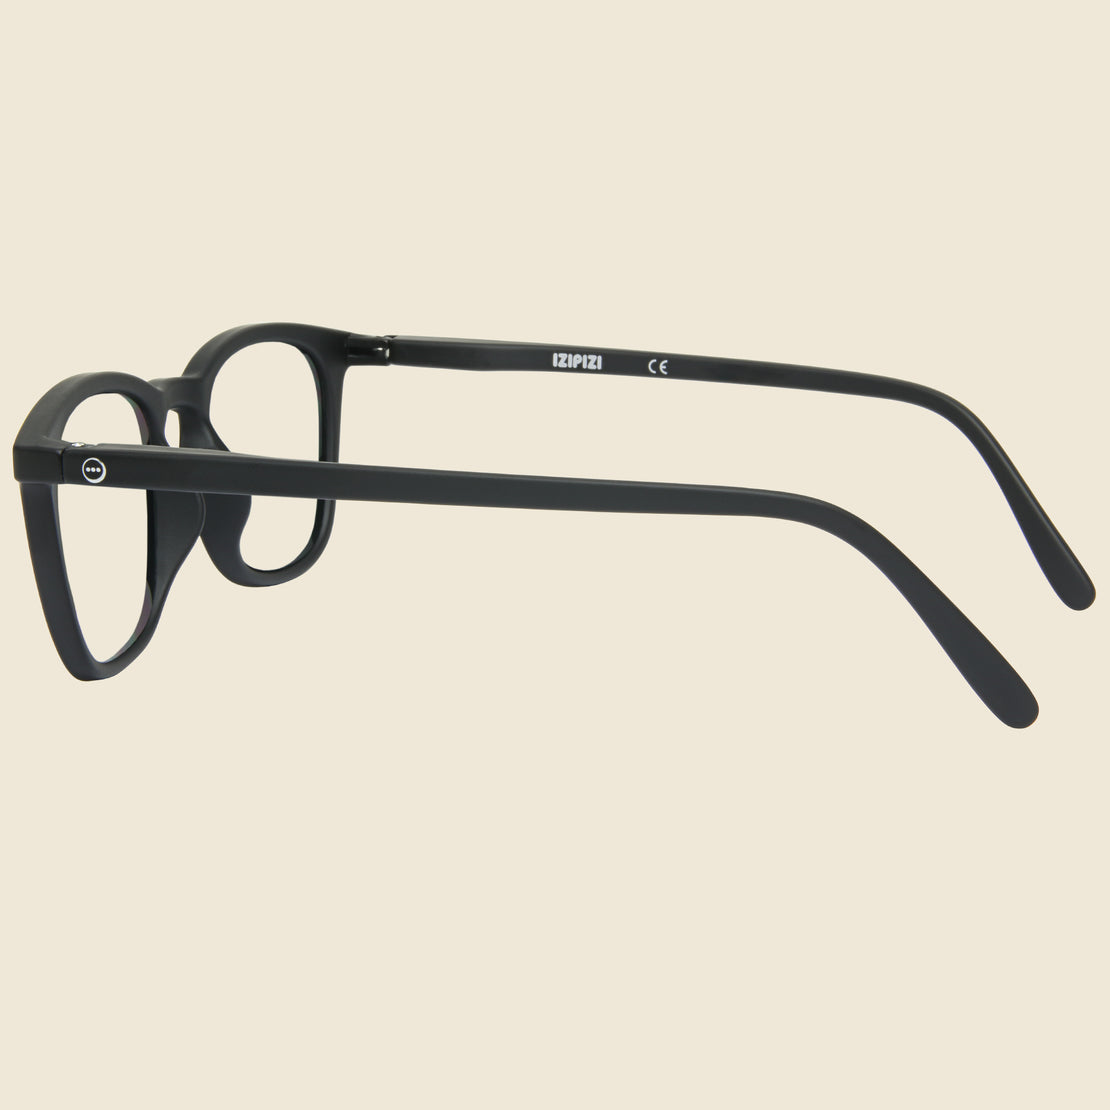 The Trapeze #E Readers - Black - Izipizi - STAG Provisions - Accessories - Eyewear